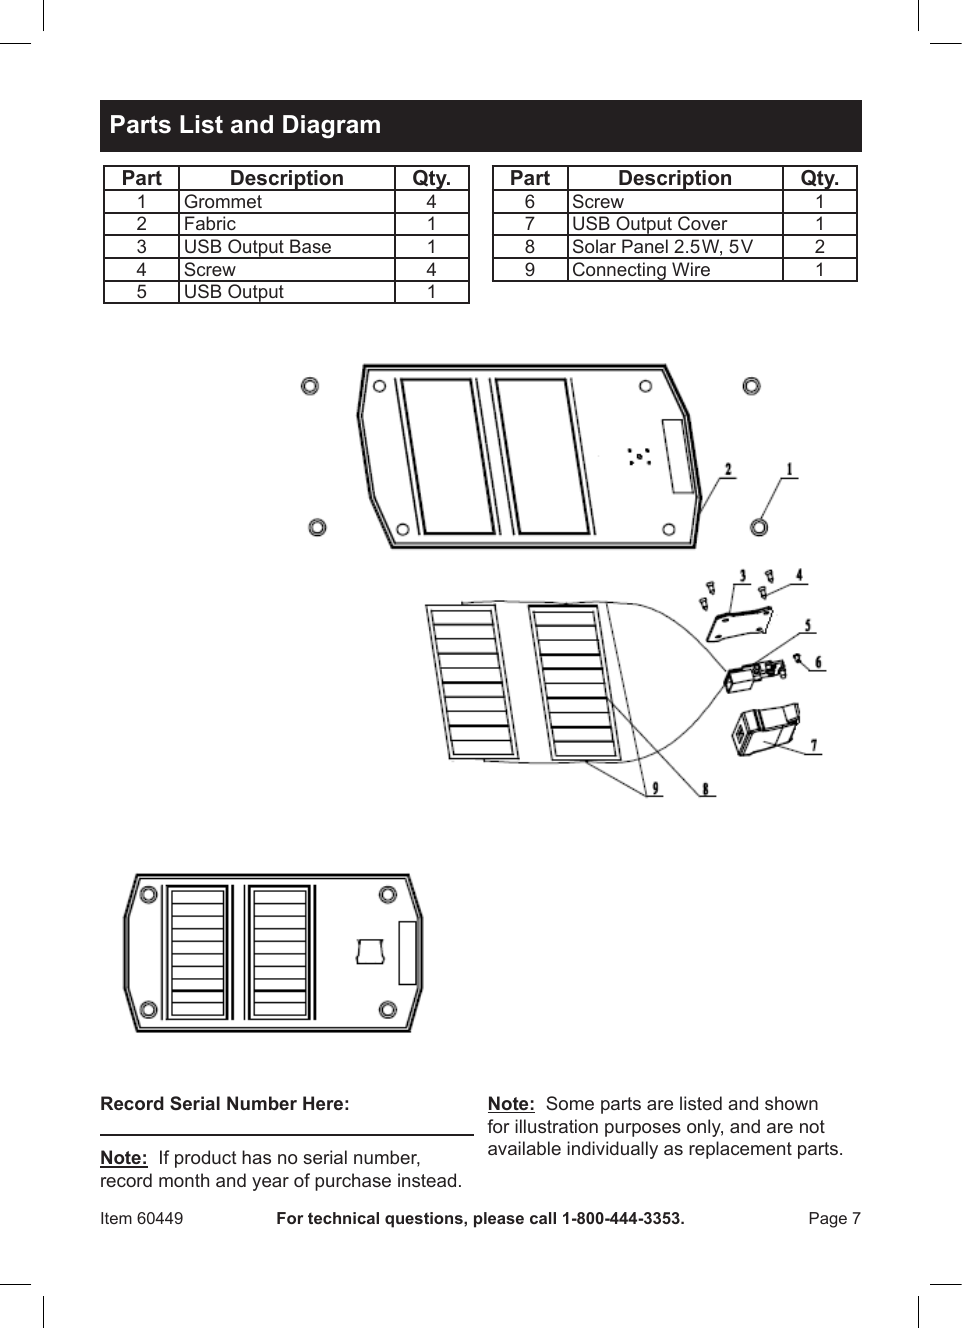 Page 7 of 8 - Harbor-Freight Harbor-Freight-5-Watt-Foldable-Solar-Panel-Charger-Product-Manual-  Harbor-freight-5-watt-foldable-solar-panel-charger-product-manual